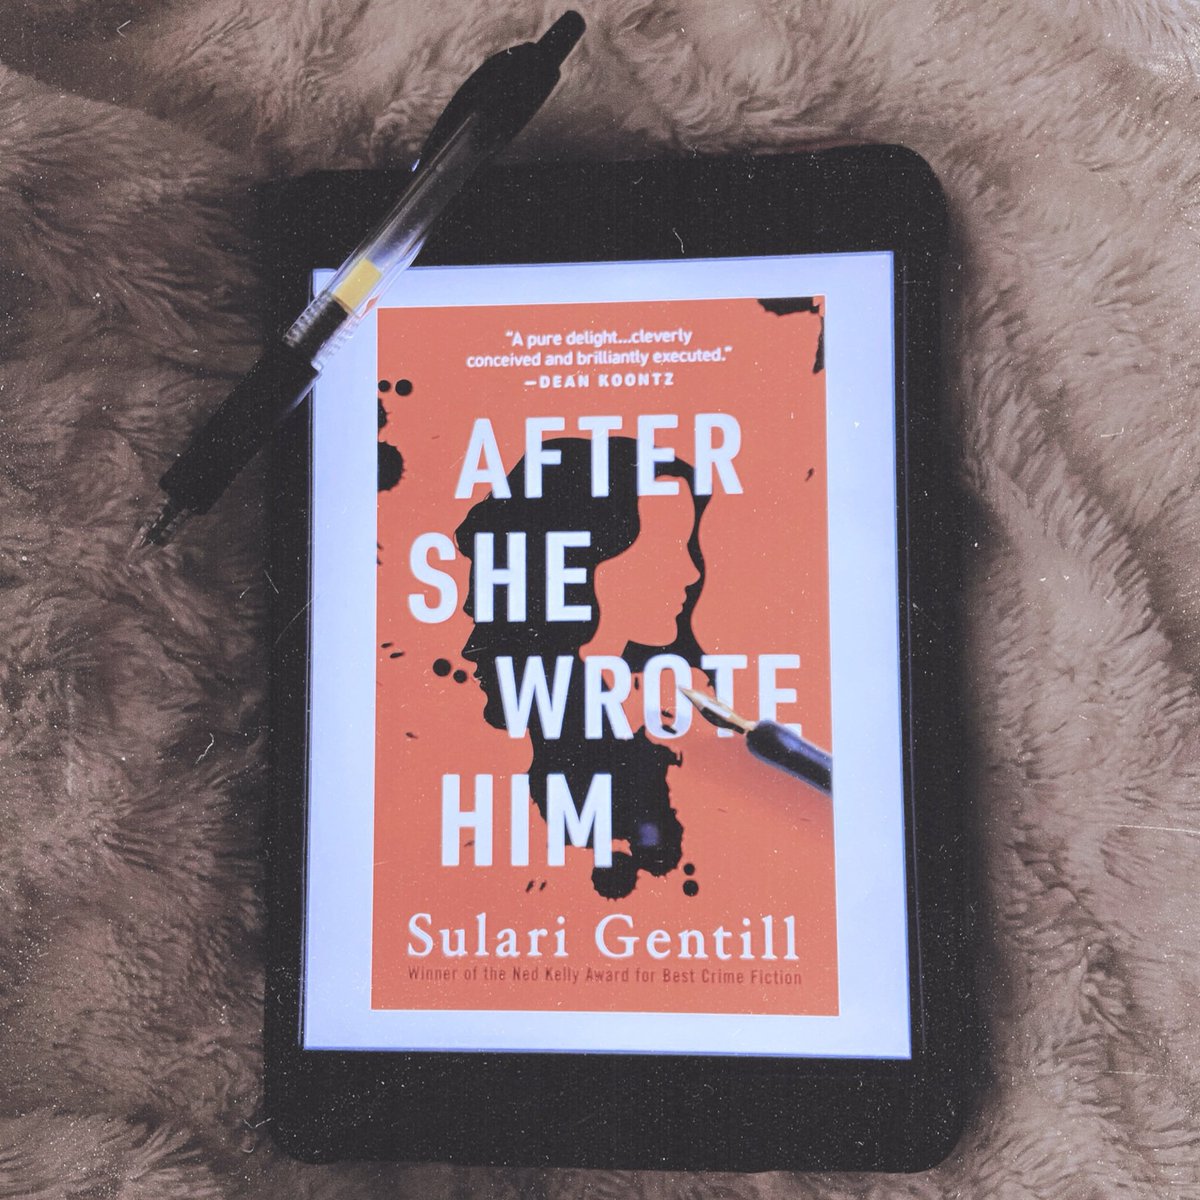 Book #7 for  #asianreadathon: After She Wrote Him, by Sulari Gentill. Reminiscent of Mr Fox but with both a narrower focus and a more satisfying conclusion (bc of the narrow focus, I suspect). A short, tightly-constructed read; I loved it and wish I’d written it.